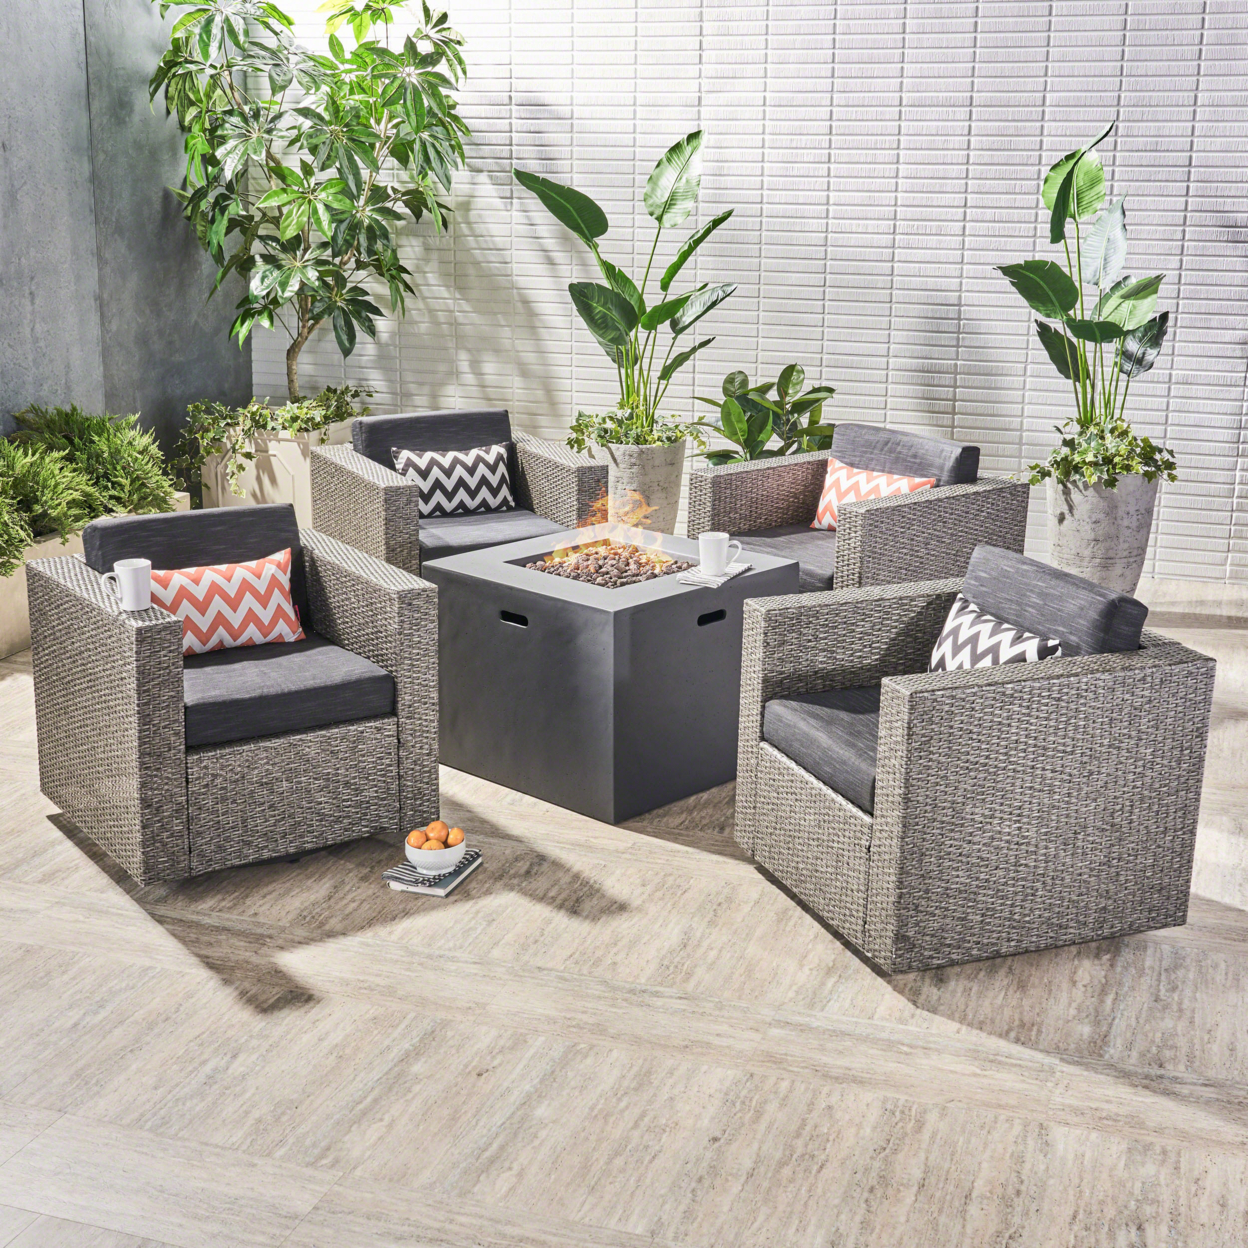 Fuller Outdoor 4 Piece Club Chair Set With Square Fire Pit - Mixed Black + Dark Gray